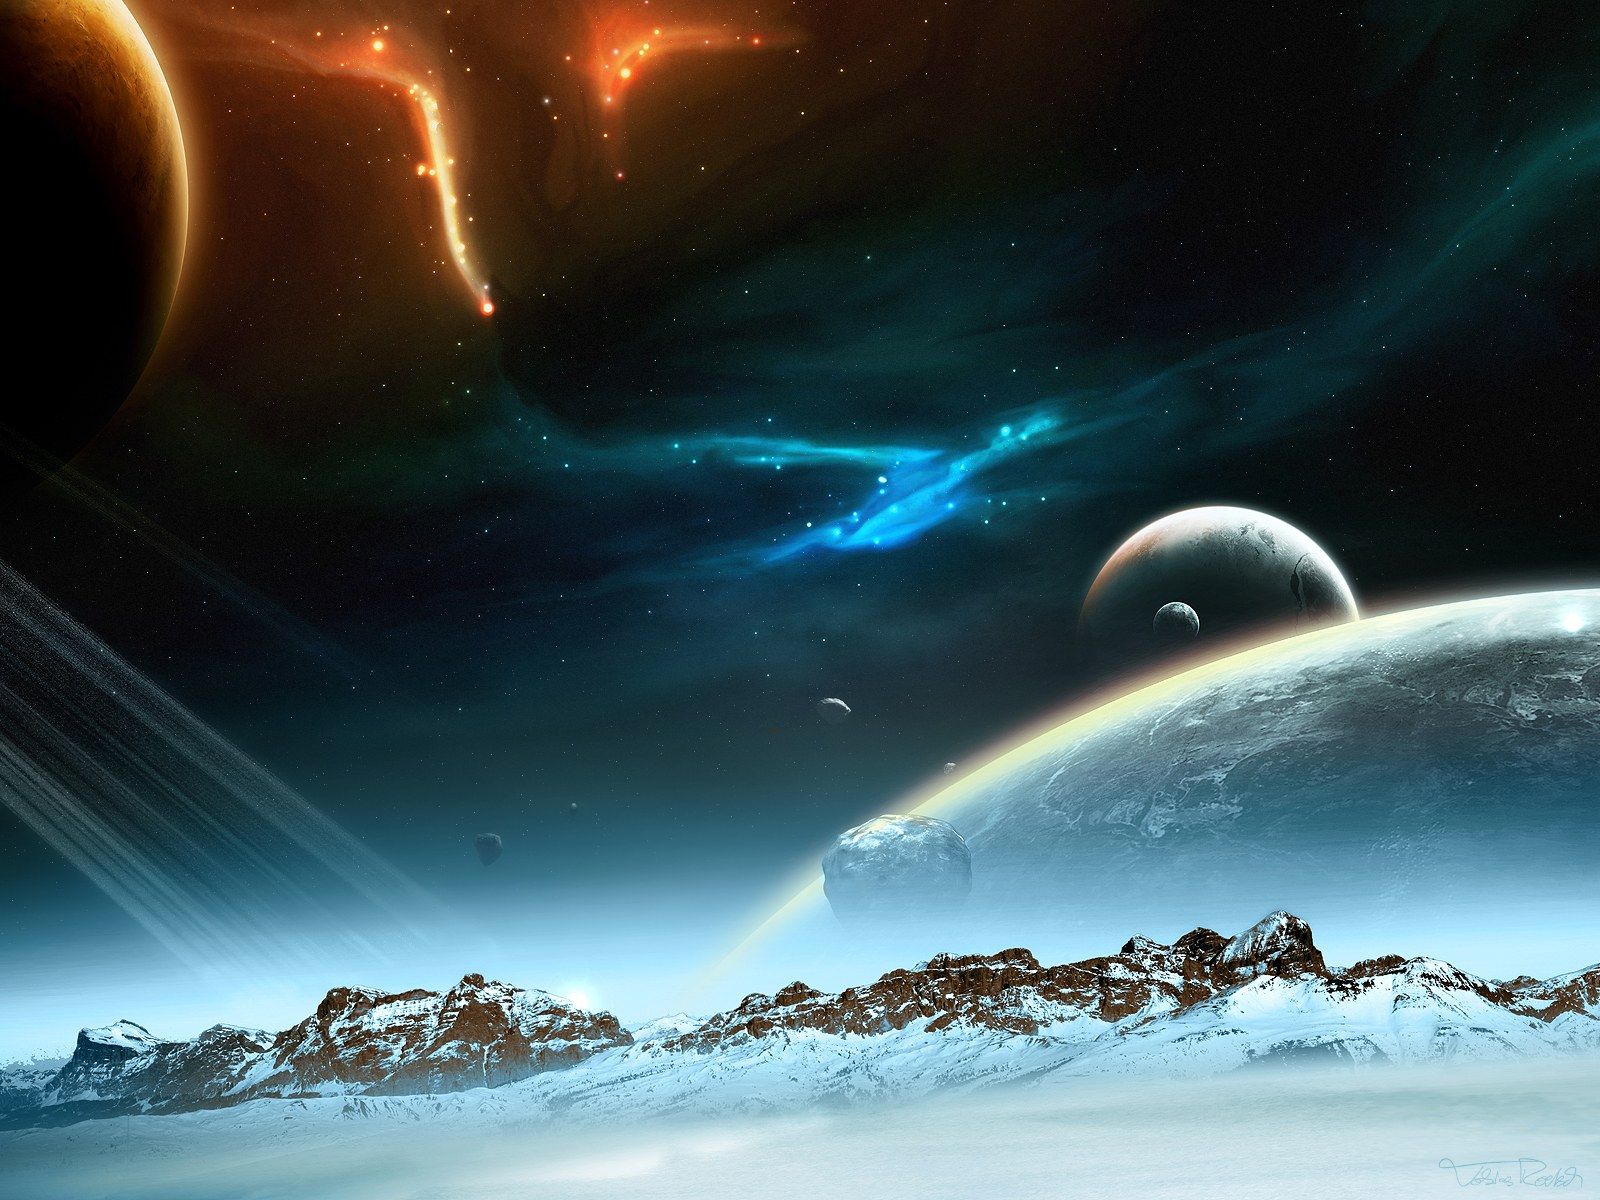 HD universe and planets digital art wallpapers 1600x1200 NO.17